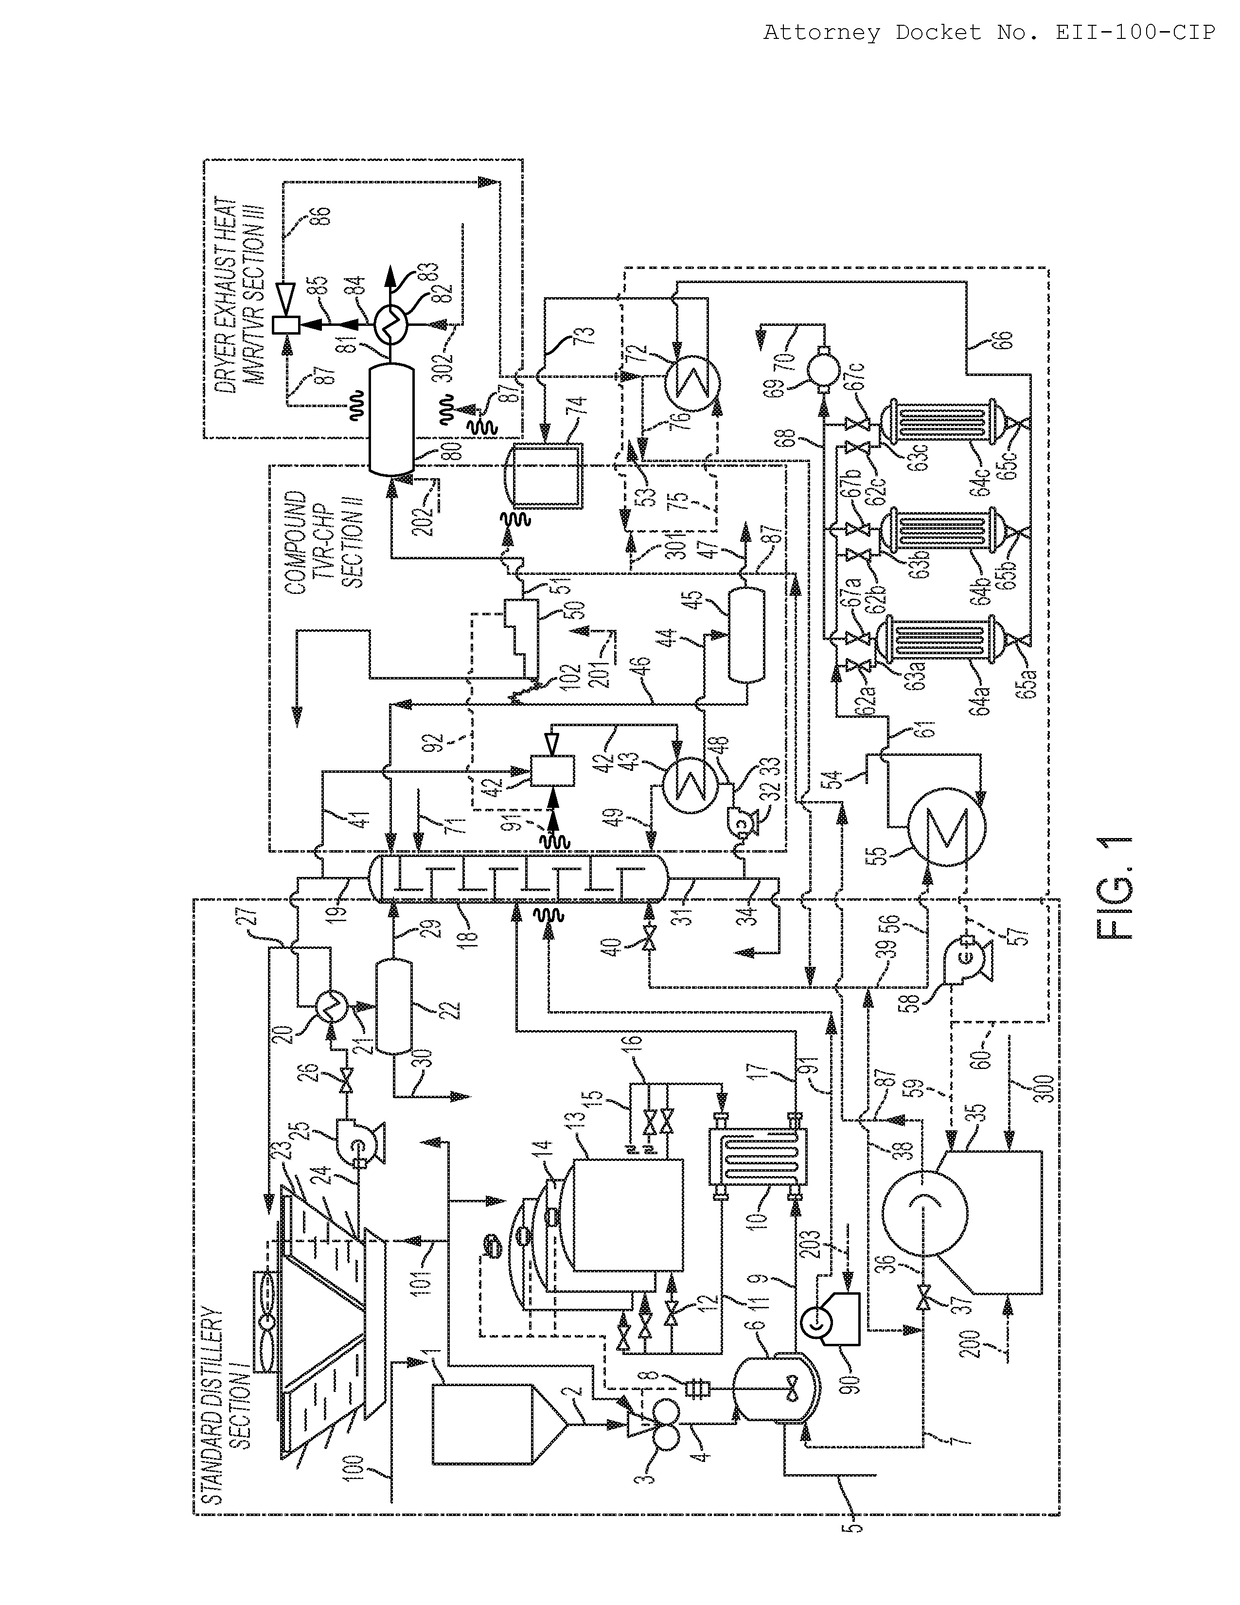 Energy-efficient systems including vapor compression for biofuel or biochemical plants